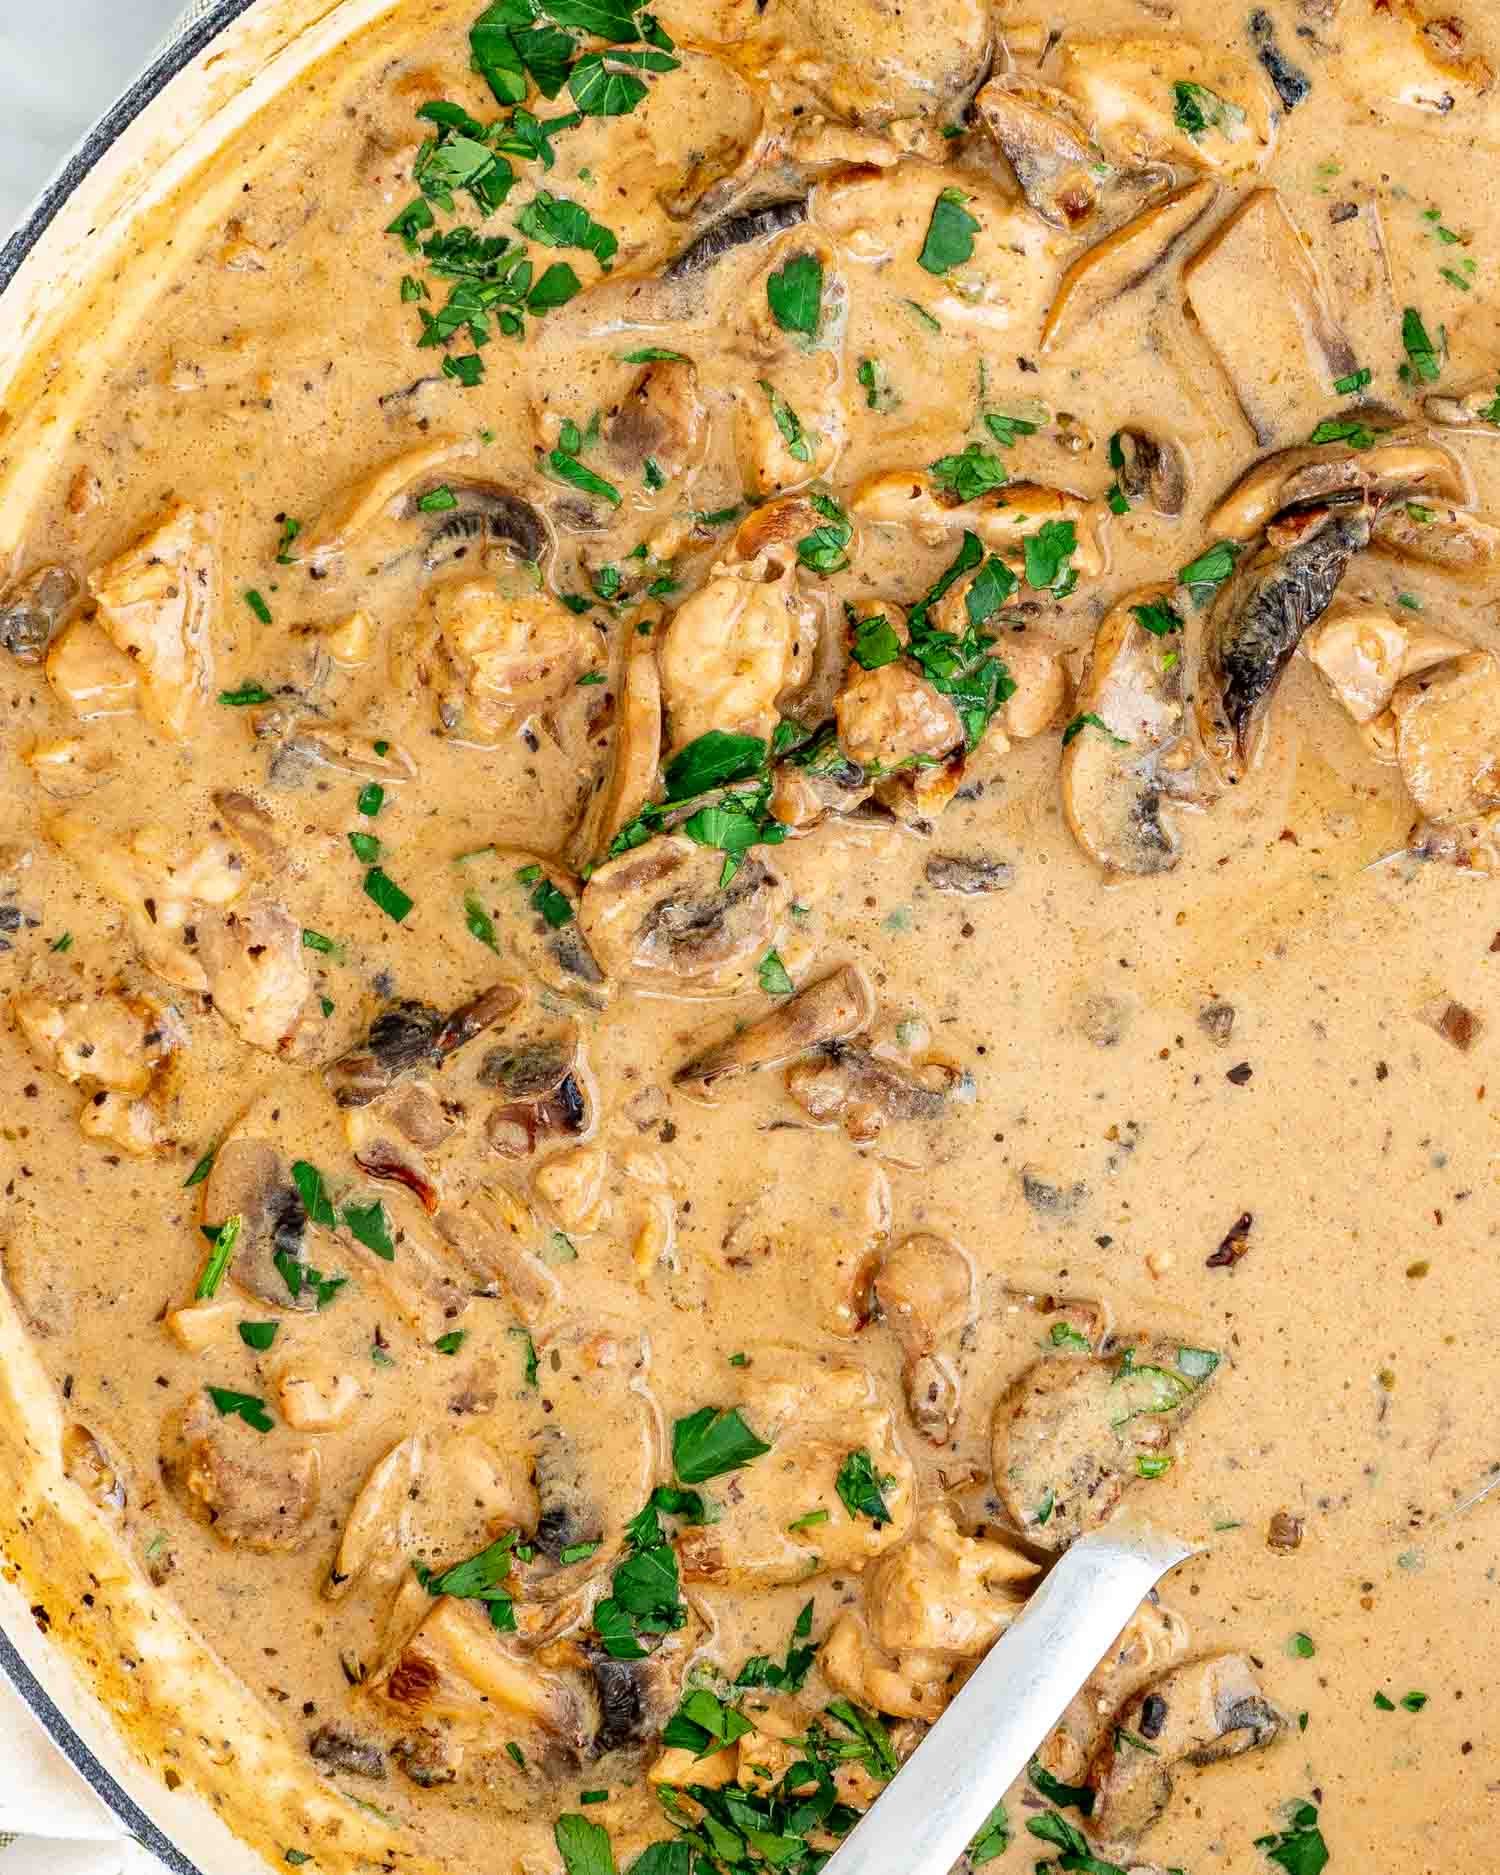 Creamy chicken stroganoff with mushrooms, garnished with parsley in a cast iron pot.